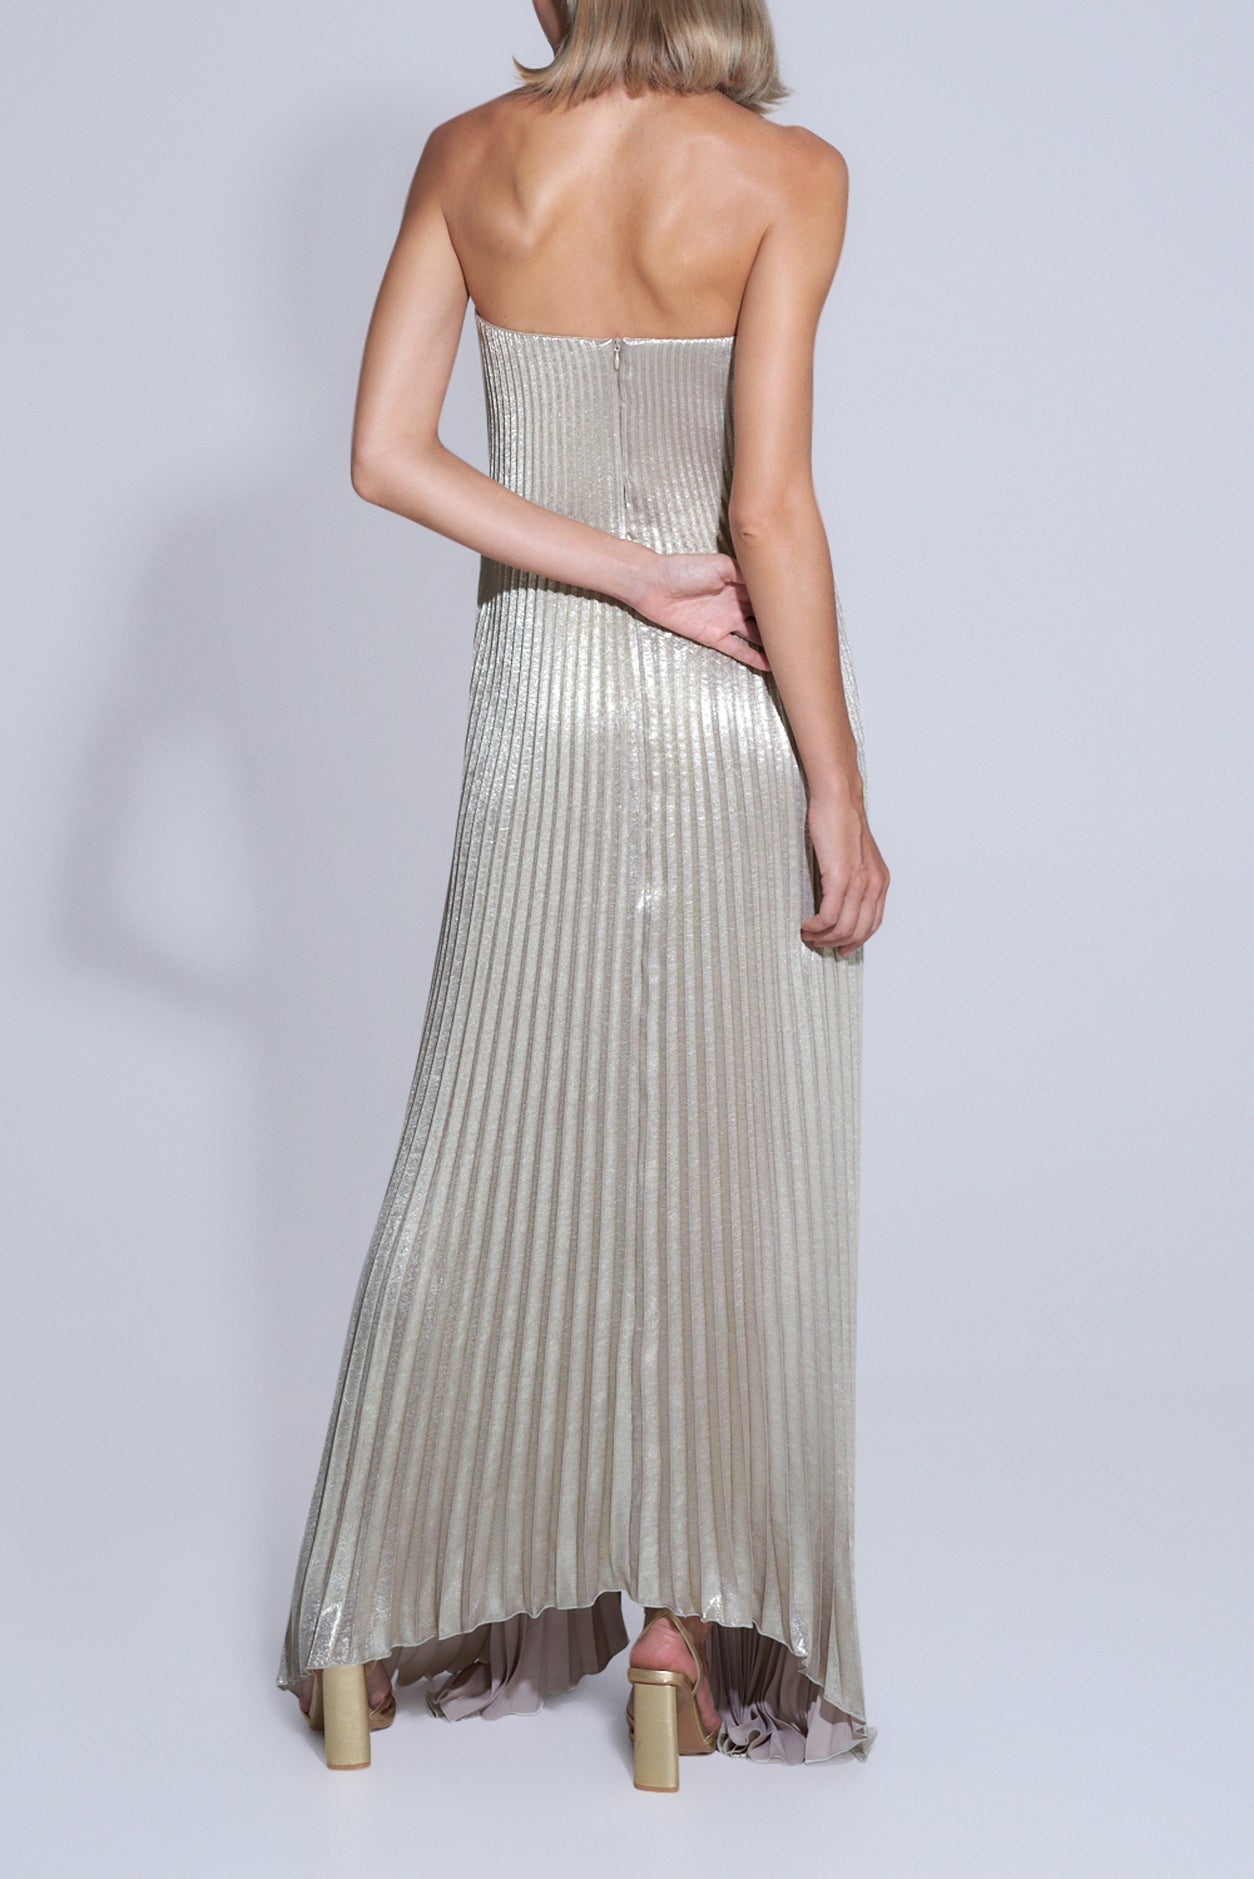 Black Tie Gown - Gold Shimmer